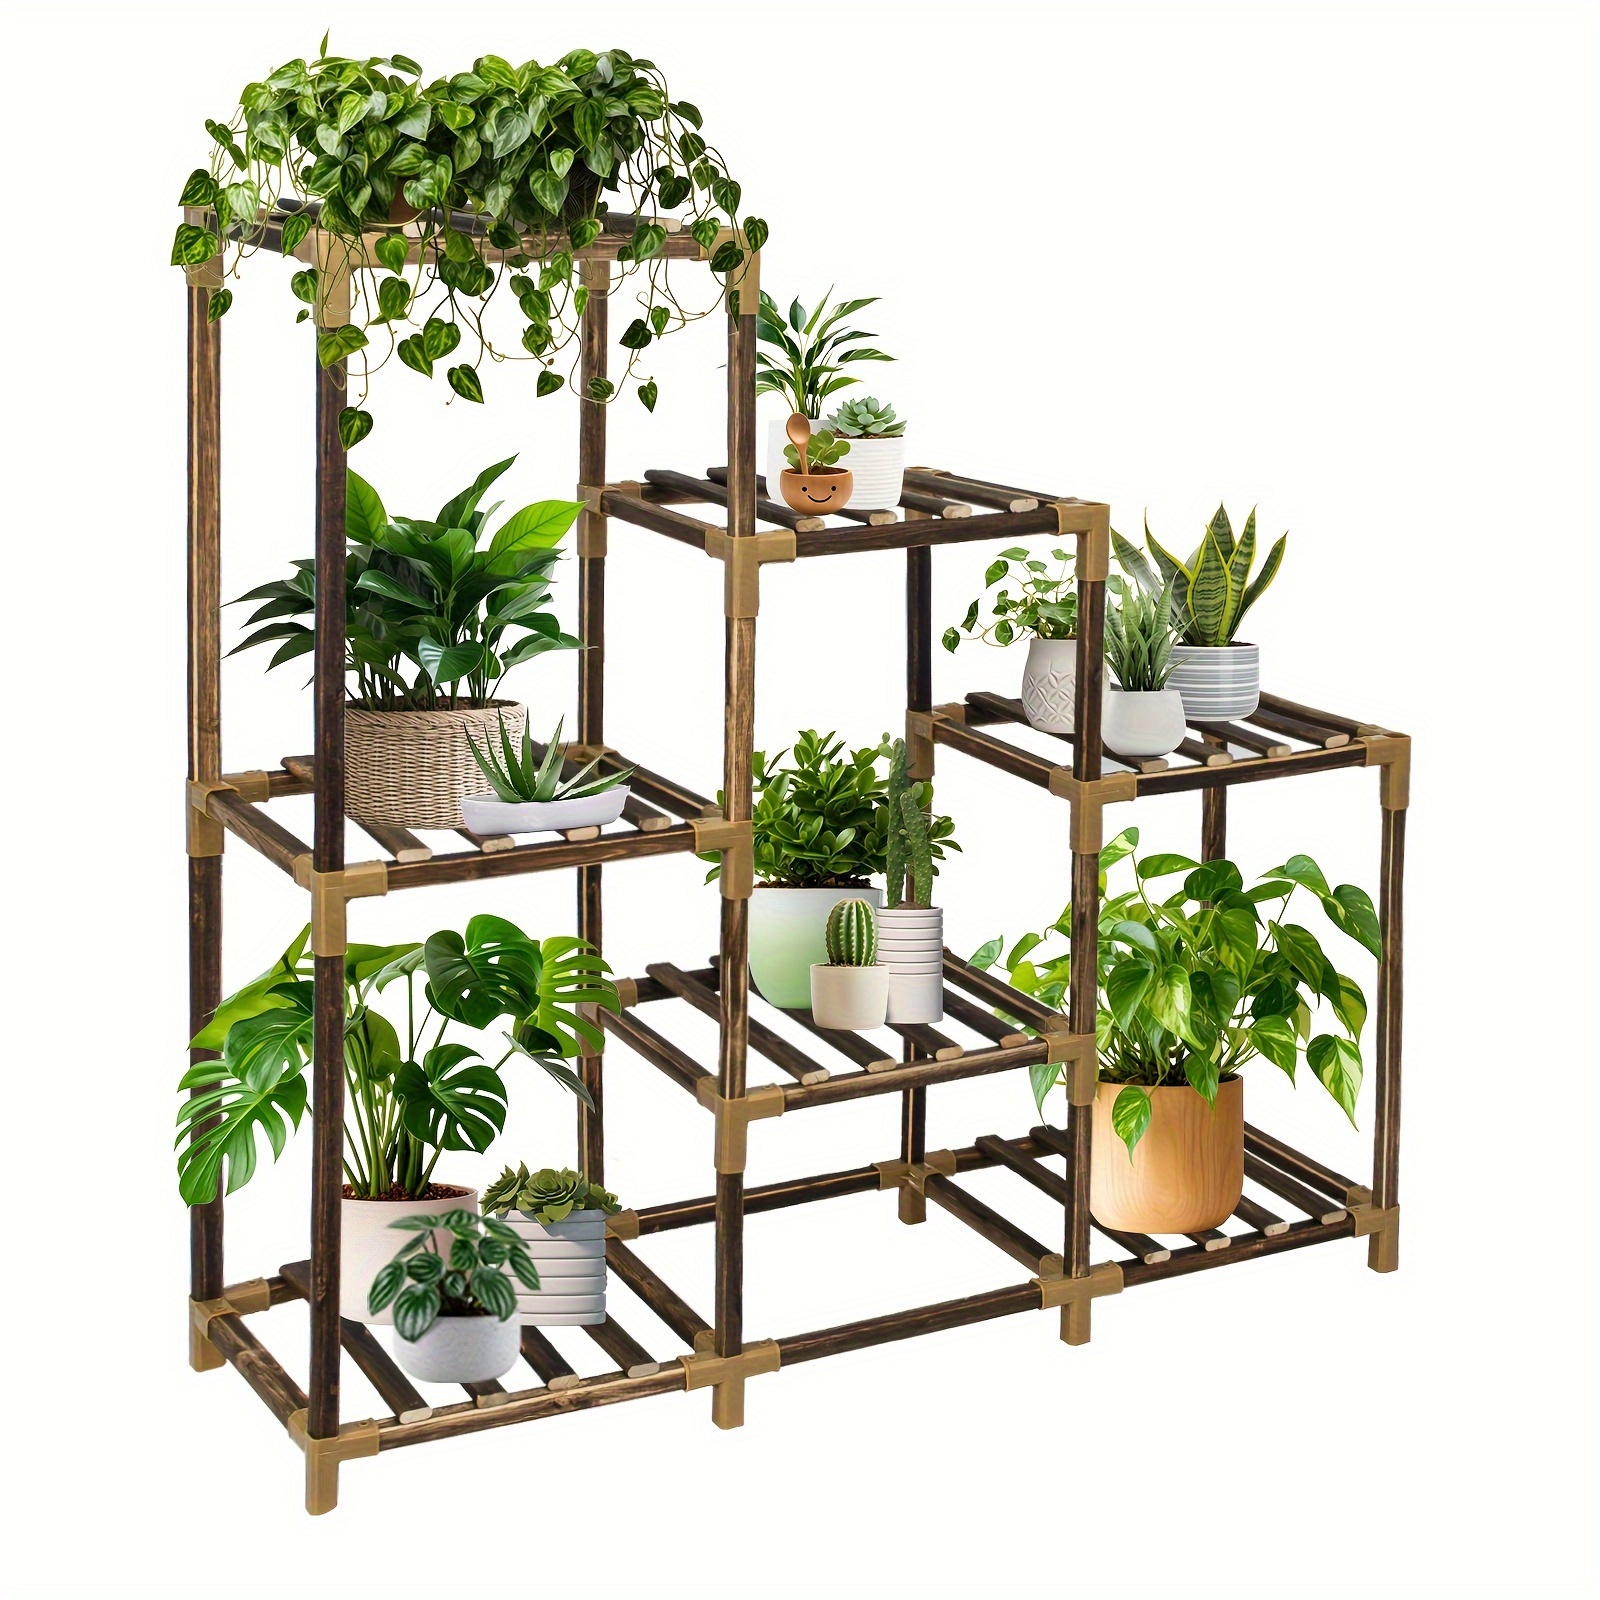 

Plant Stand Indoor, 3-tier Outdoor Wood Plant Stand For Multiple Plants, Accommodates 7 Potted Plants, Ideal For Gardens, Room Corners And Plant Gardening Gifts